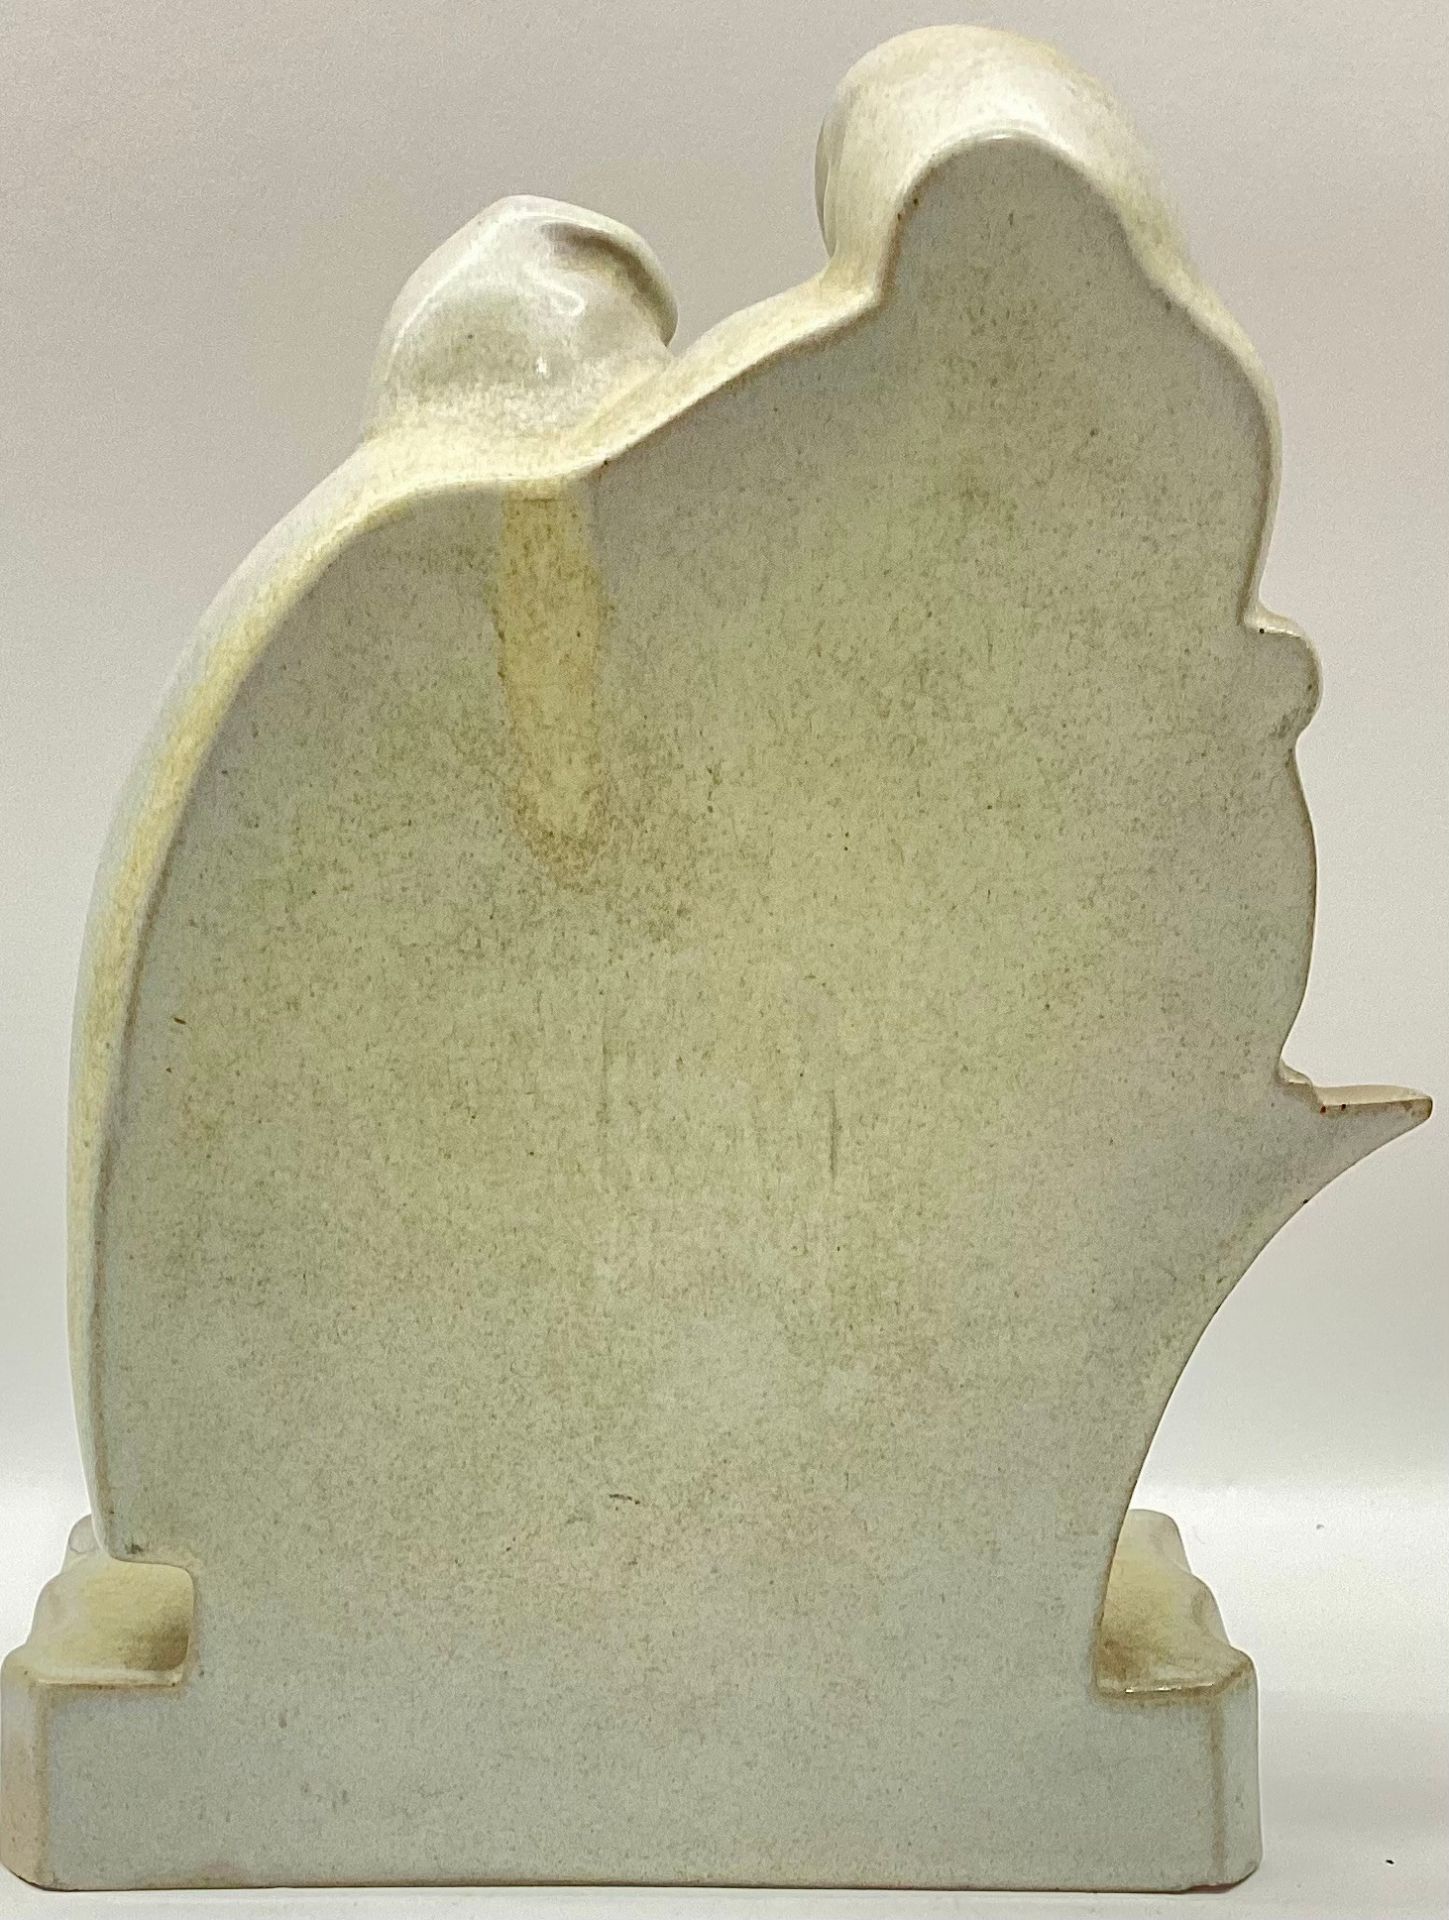 Poole Pottery Carter Stabler Adams Love birds bookend no. 808 deigned by John Adams. - Image 2 of 3